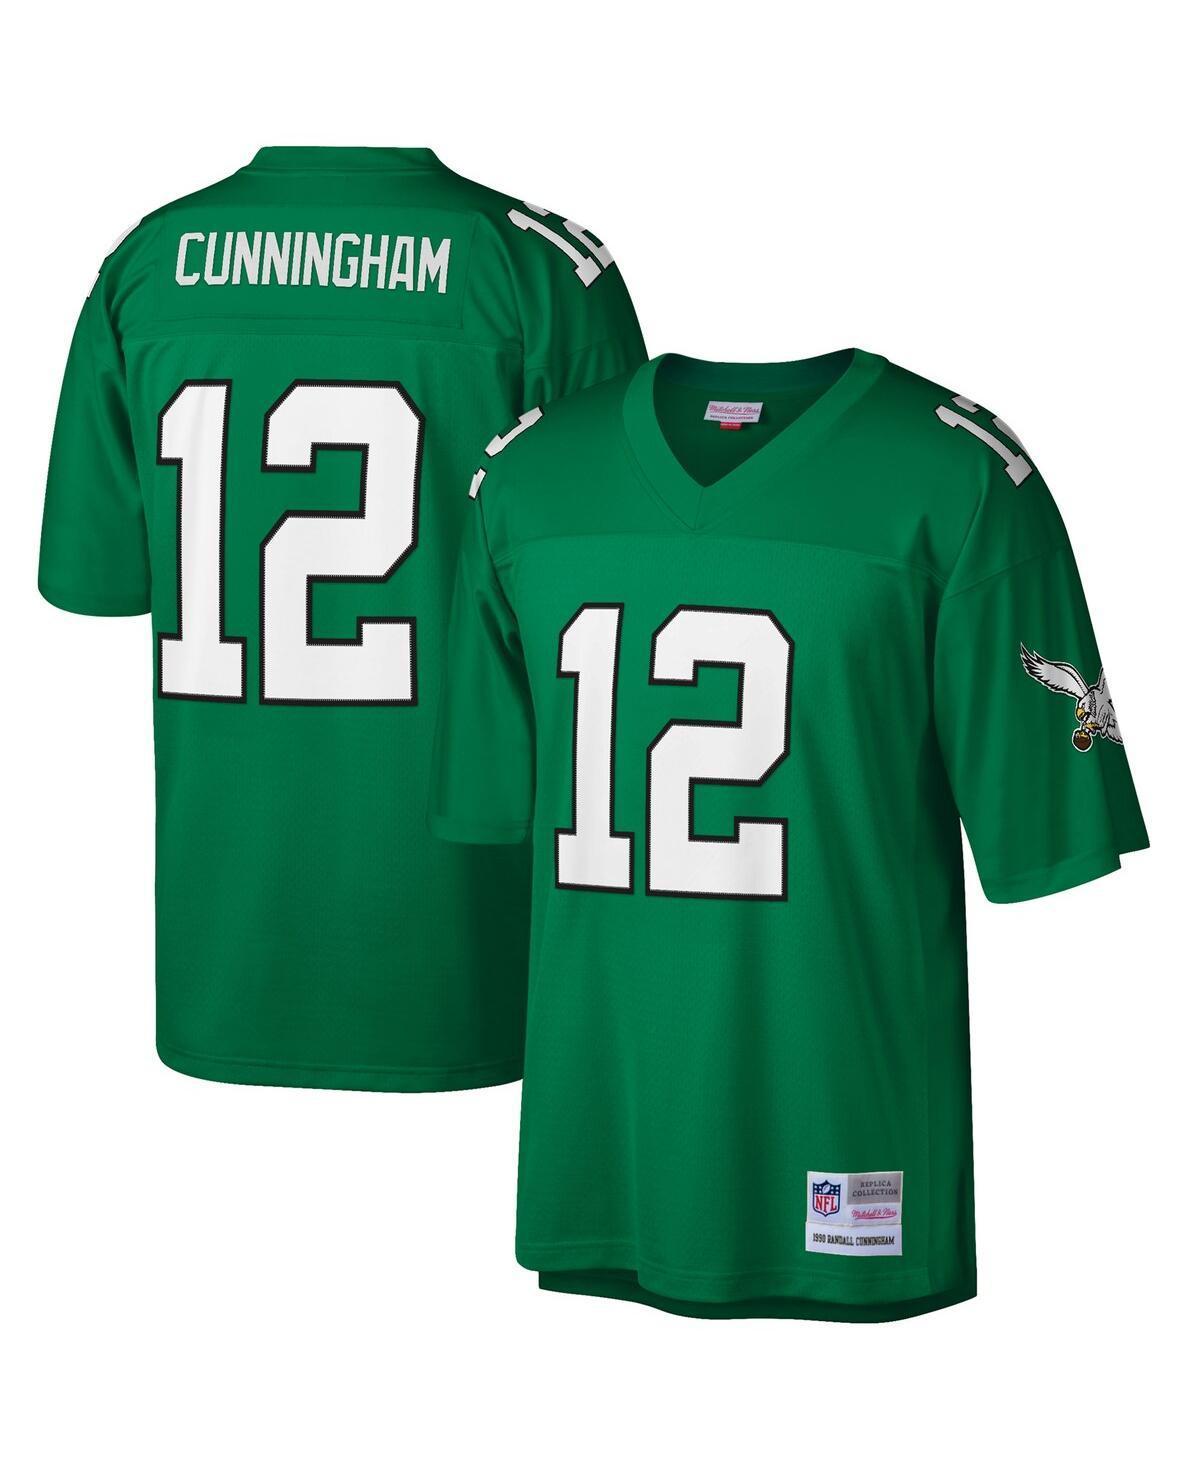 Big & Tall NFL Legacy Jersey Product Image